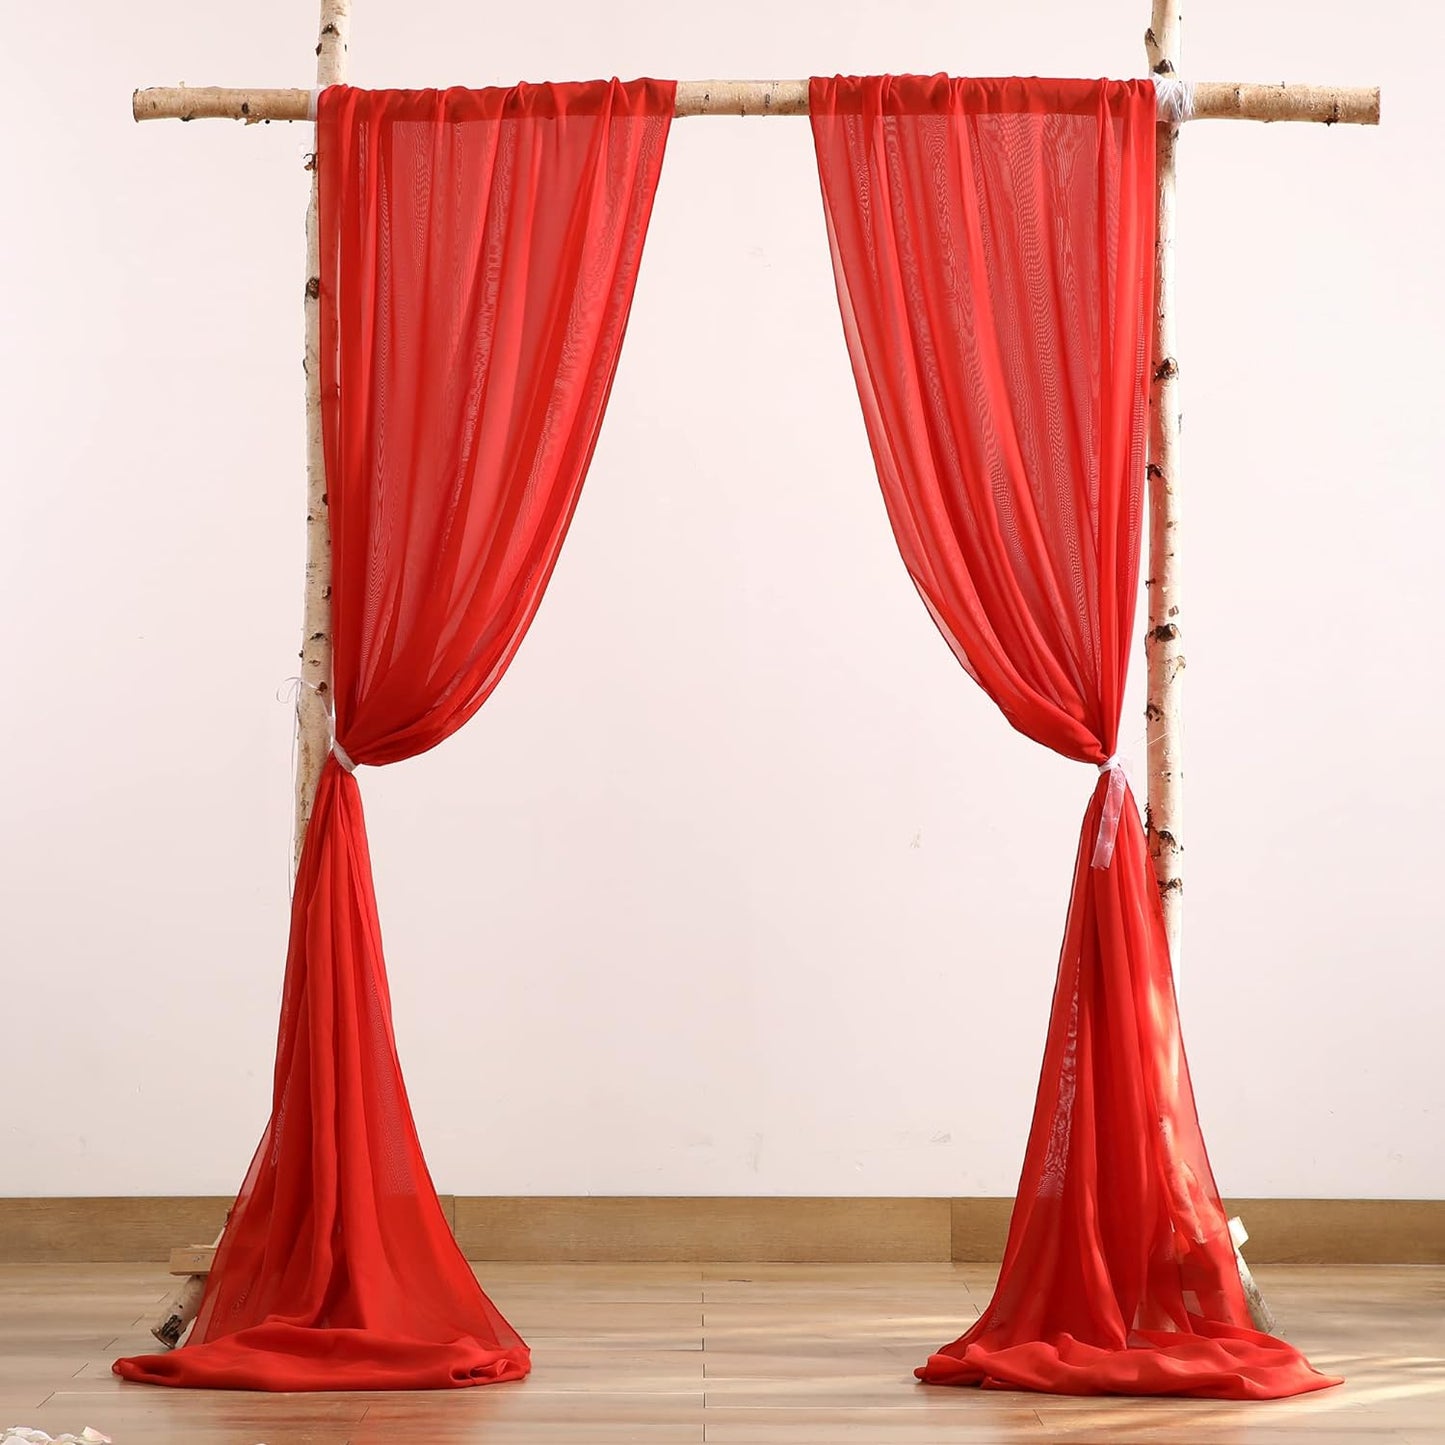 10Ft X 10Ft White Chiffon Backdrop Curtains, Wrinkle-Free Sheer Chiffon Fabric Curtain Drapes for Wedding Ceremony Arch Party Stage Decoration  Wish Care Red  